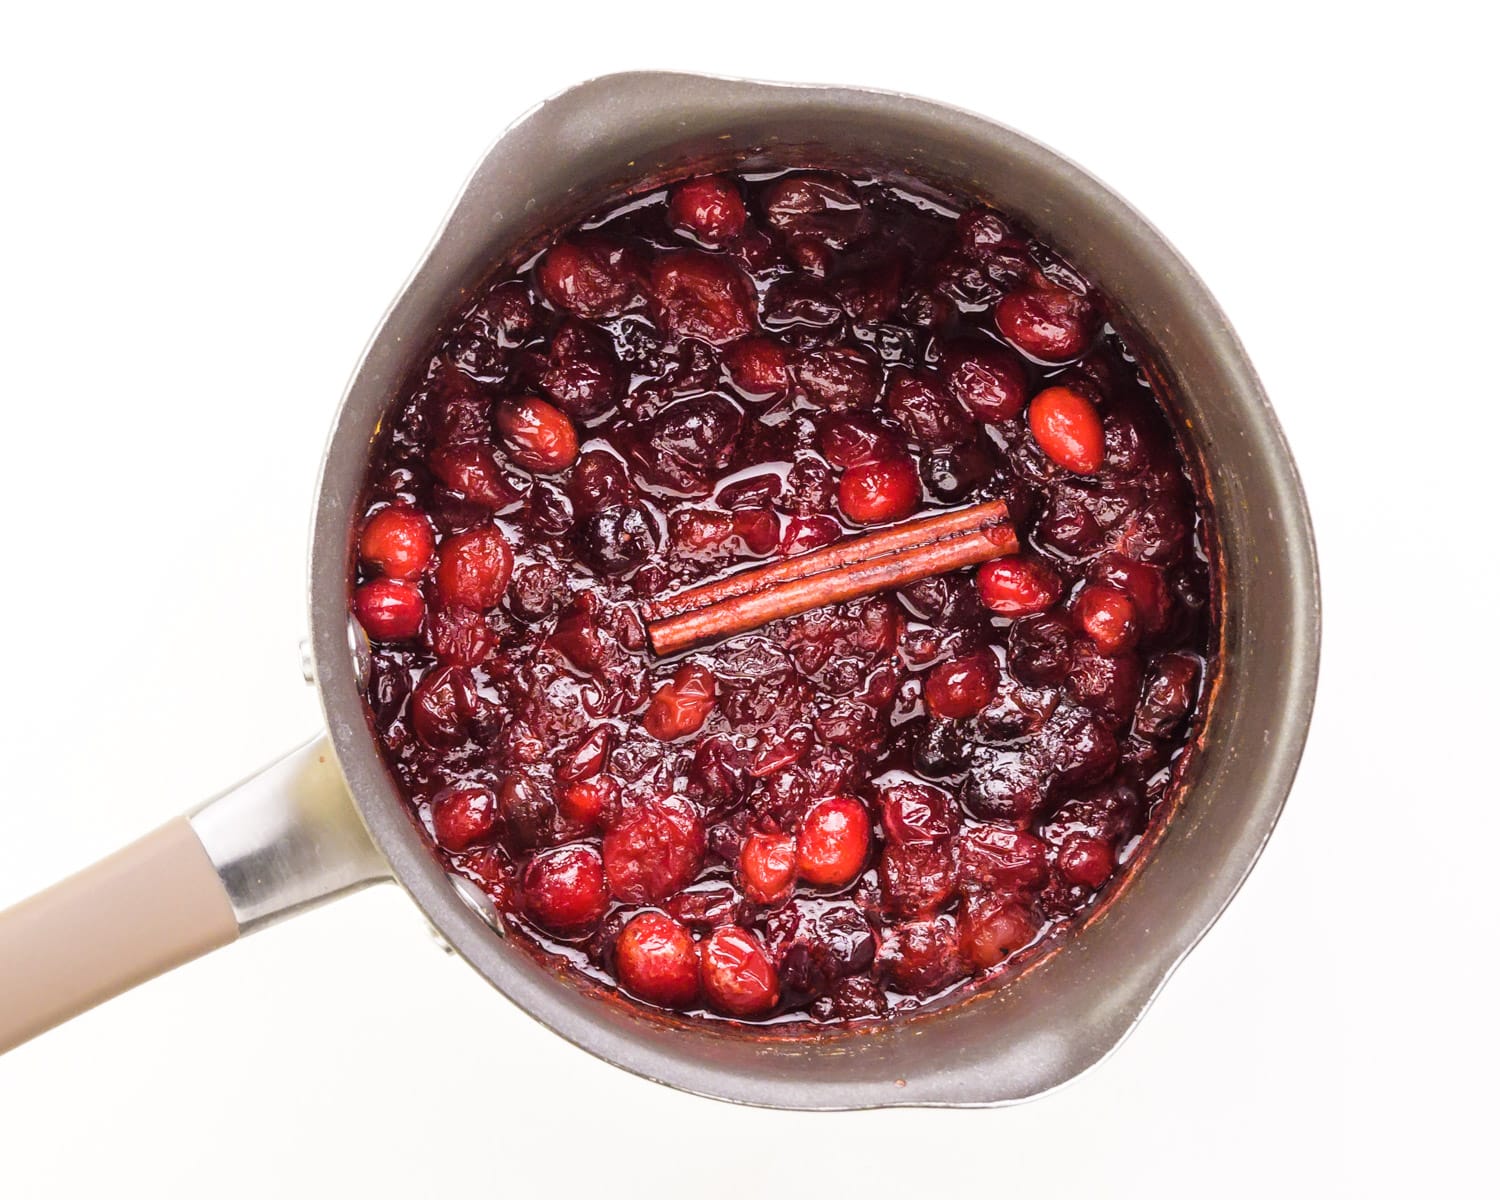 Fresh cranberries are in a saucepan with a cinnamon stick on top.